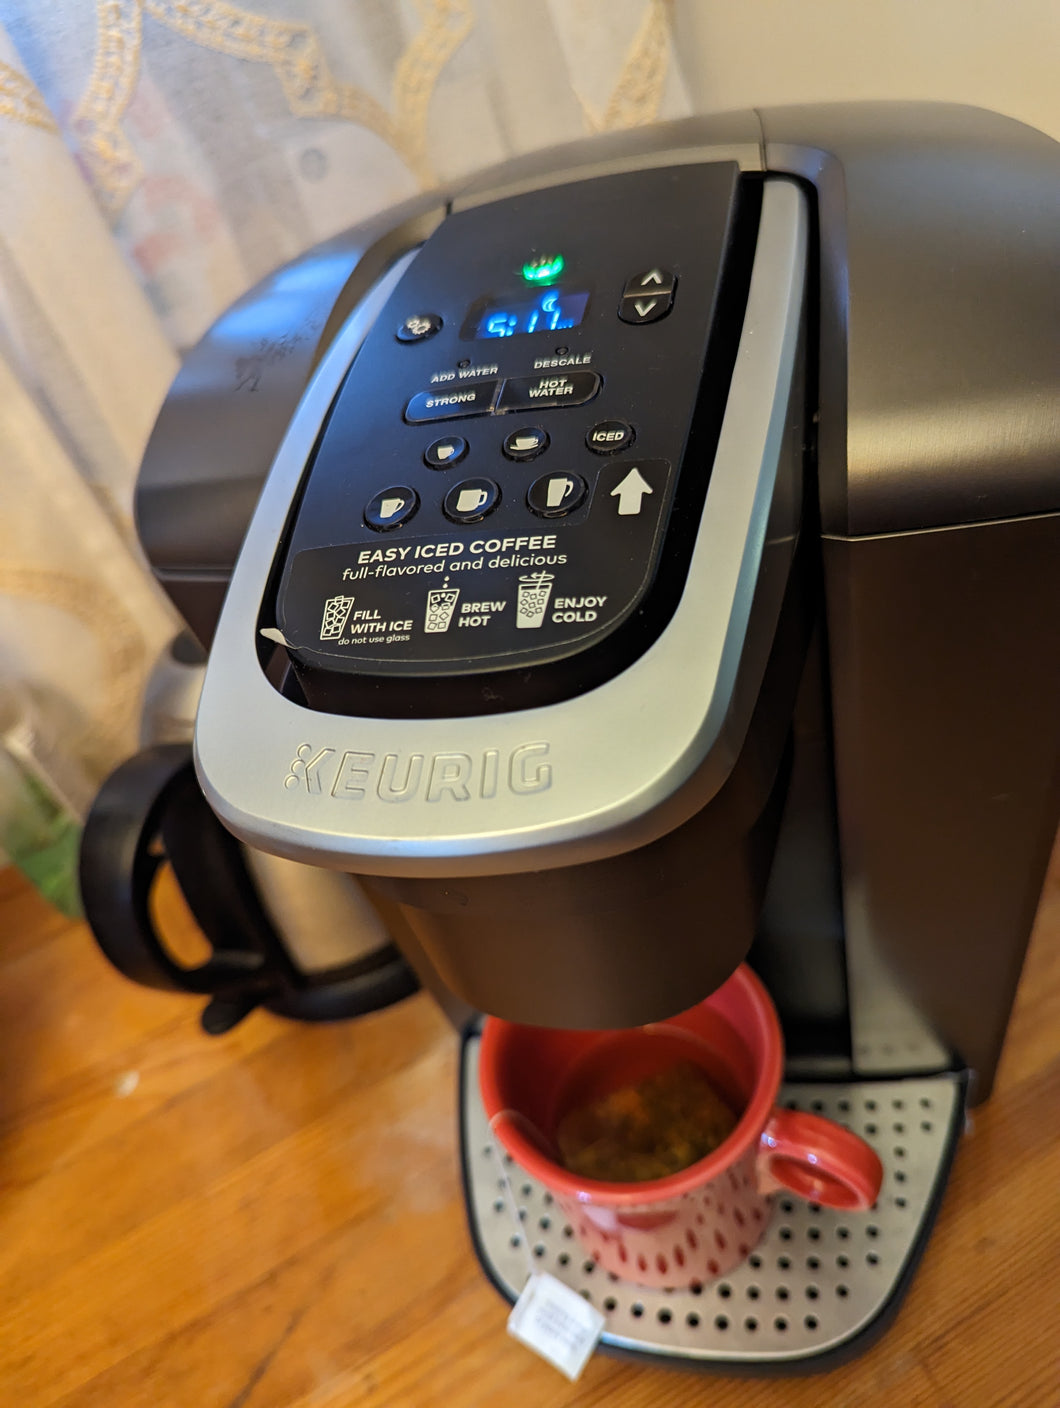 Top view of Keurig machine (black with silver accents). Ten small buttons and a small screen appear on top. A silver handle says Keurig on it. A red mug is underneath the machine with a tea bag in it. 